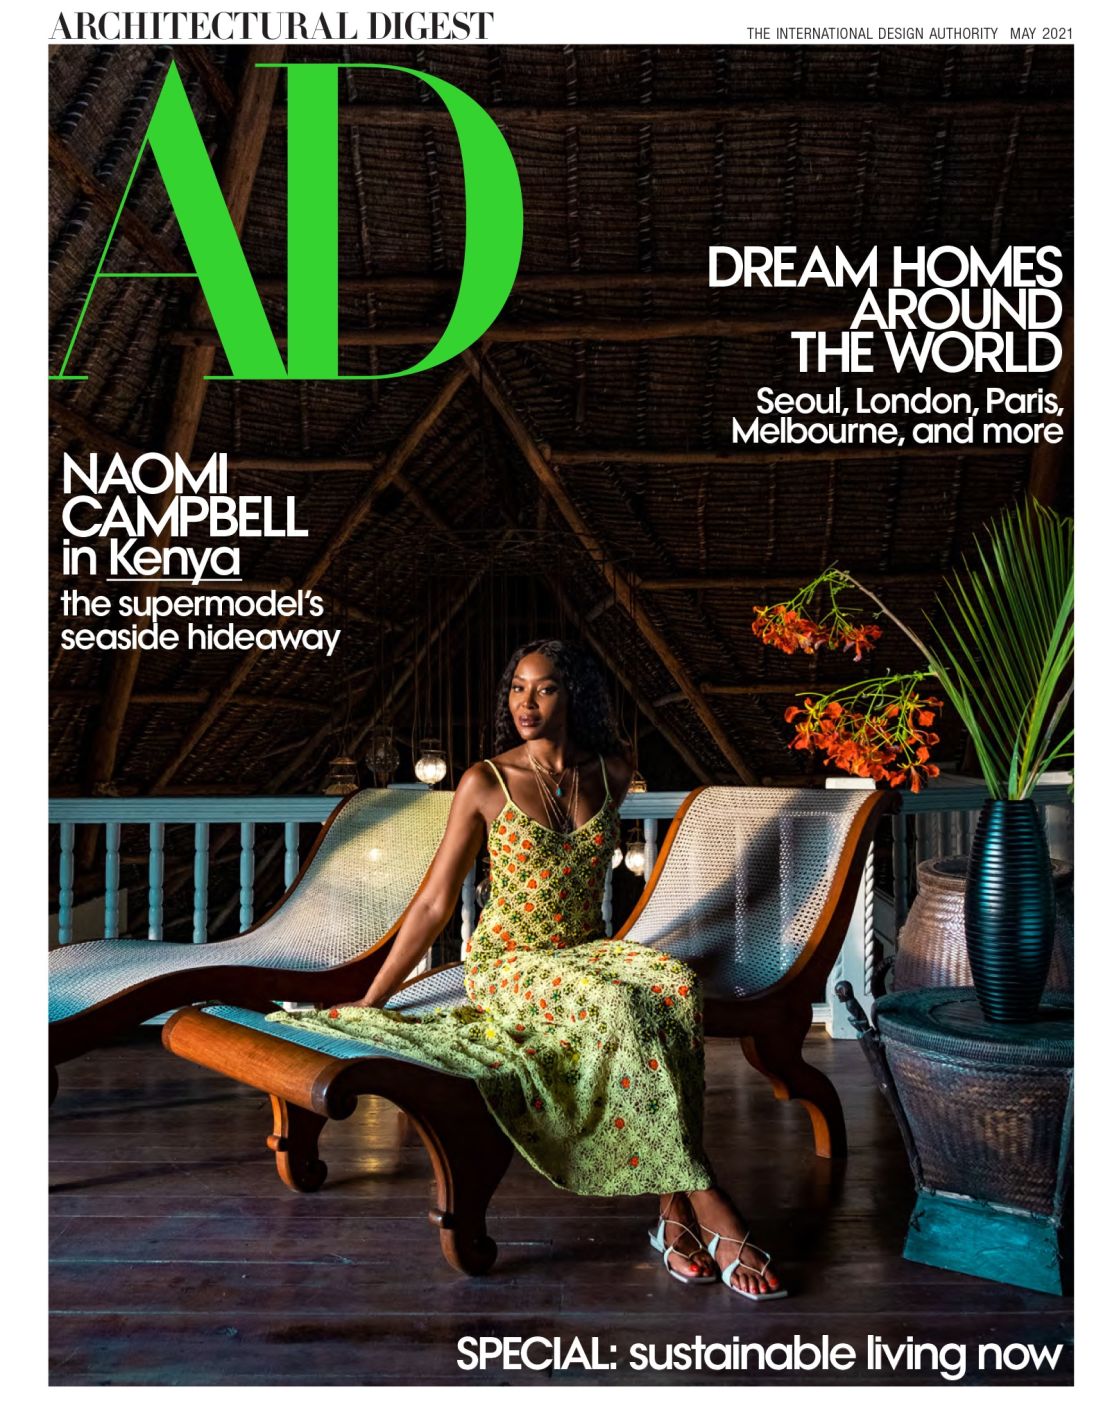 The May issue of Architectural Digest featuring Naomi Campbell.